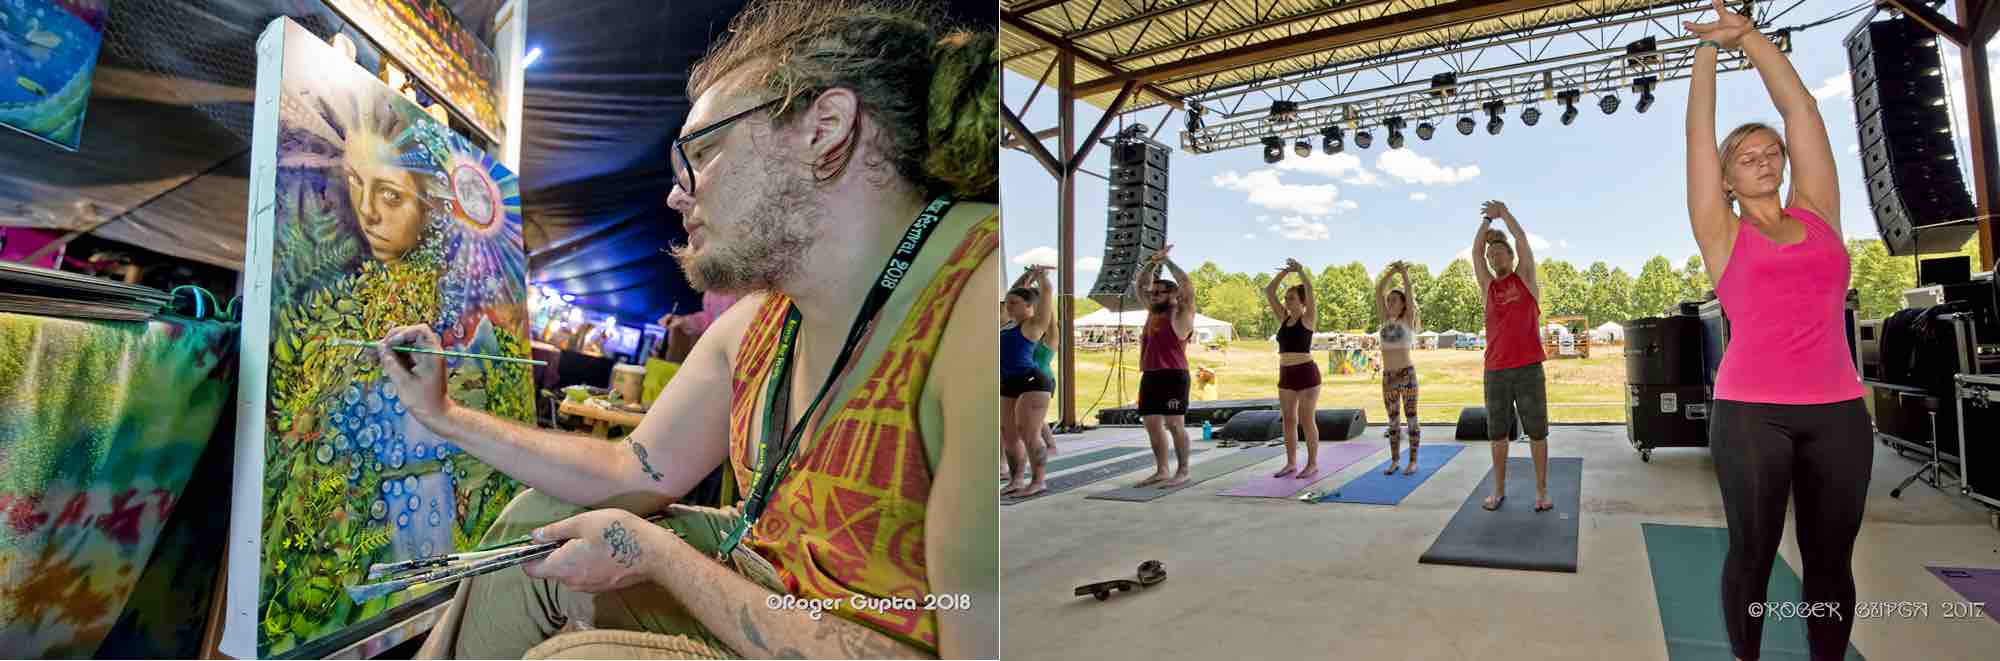 workshops at mountain music festival art and yoga on the main stage